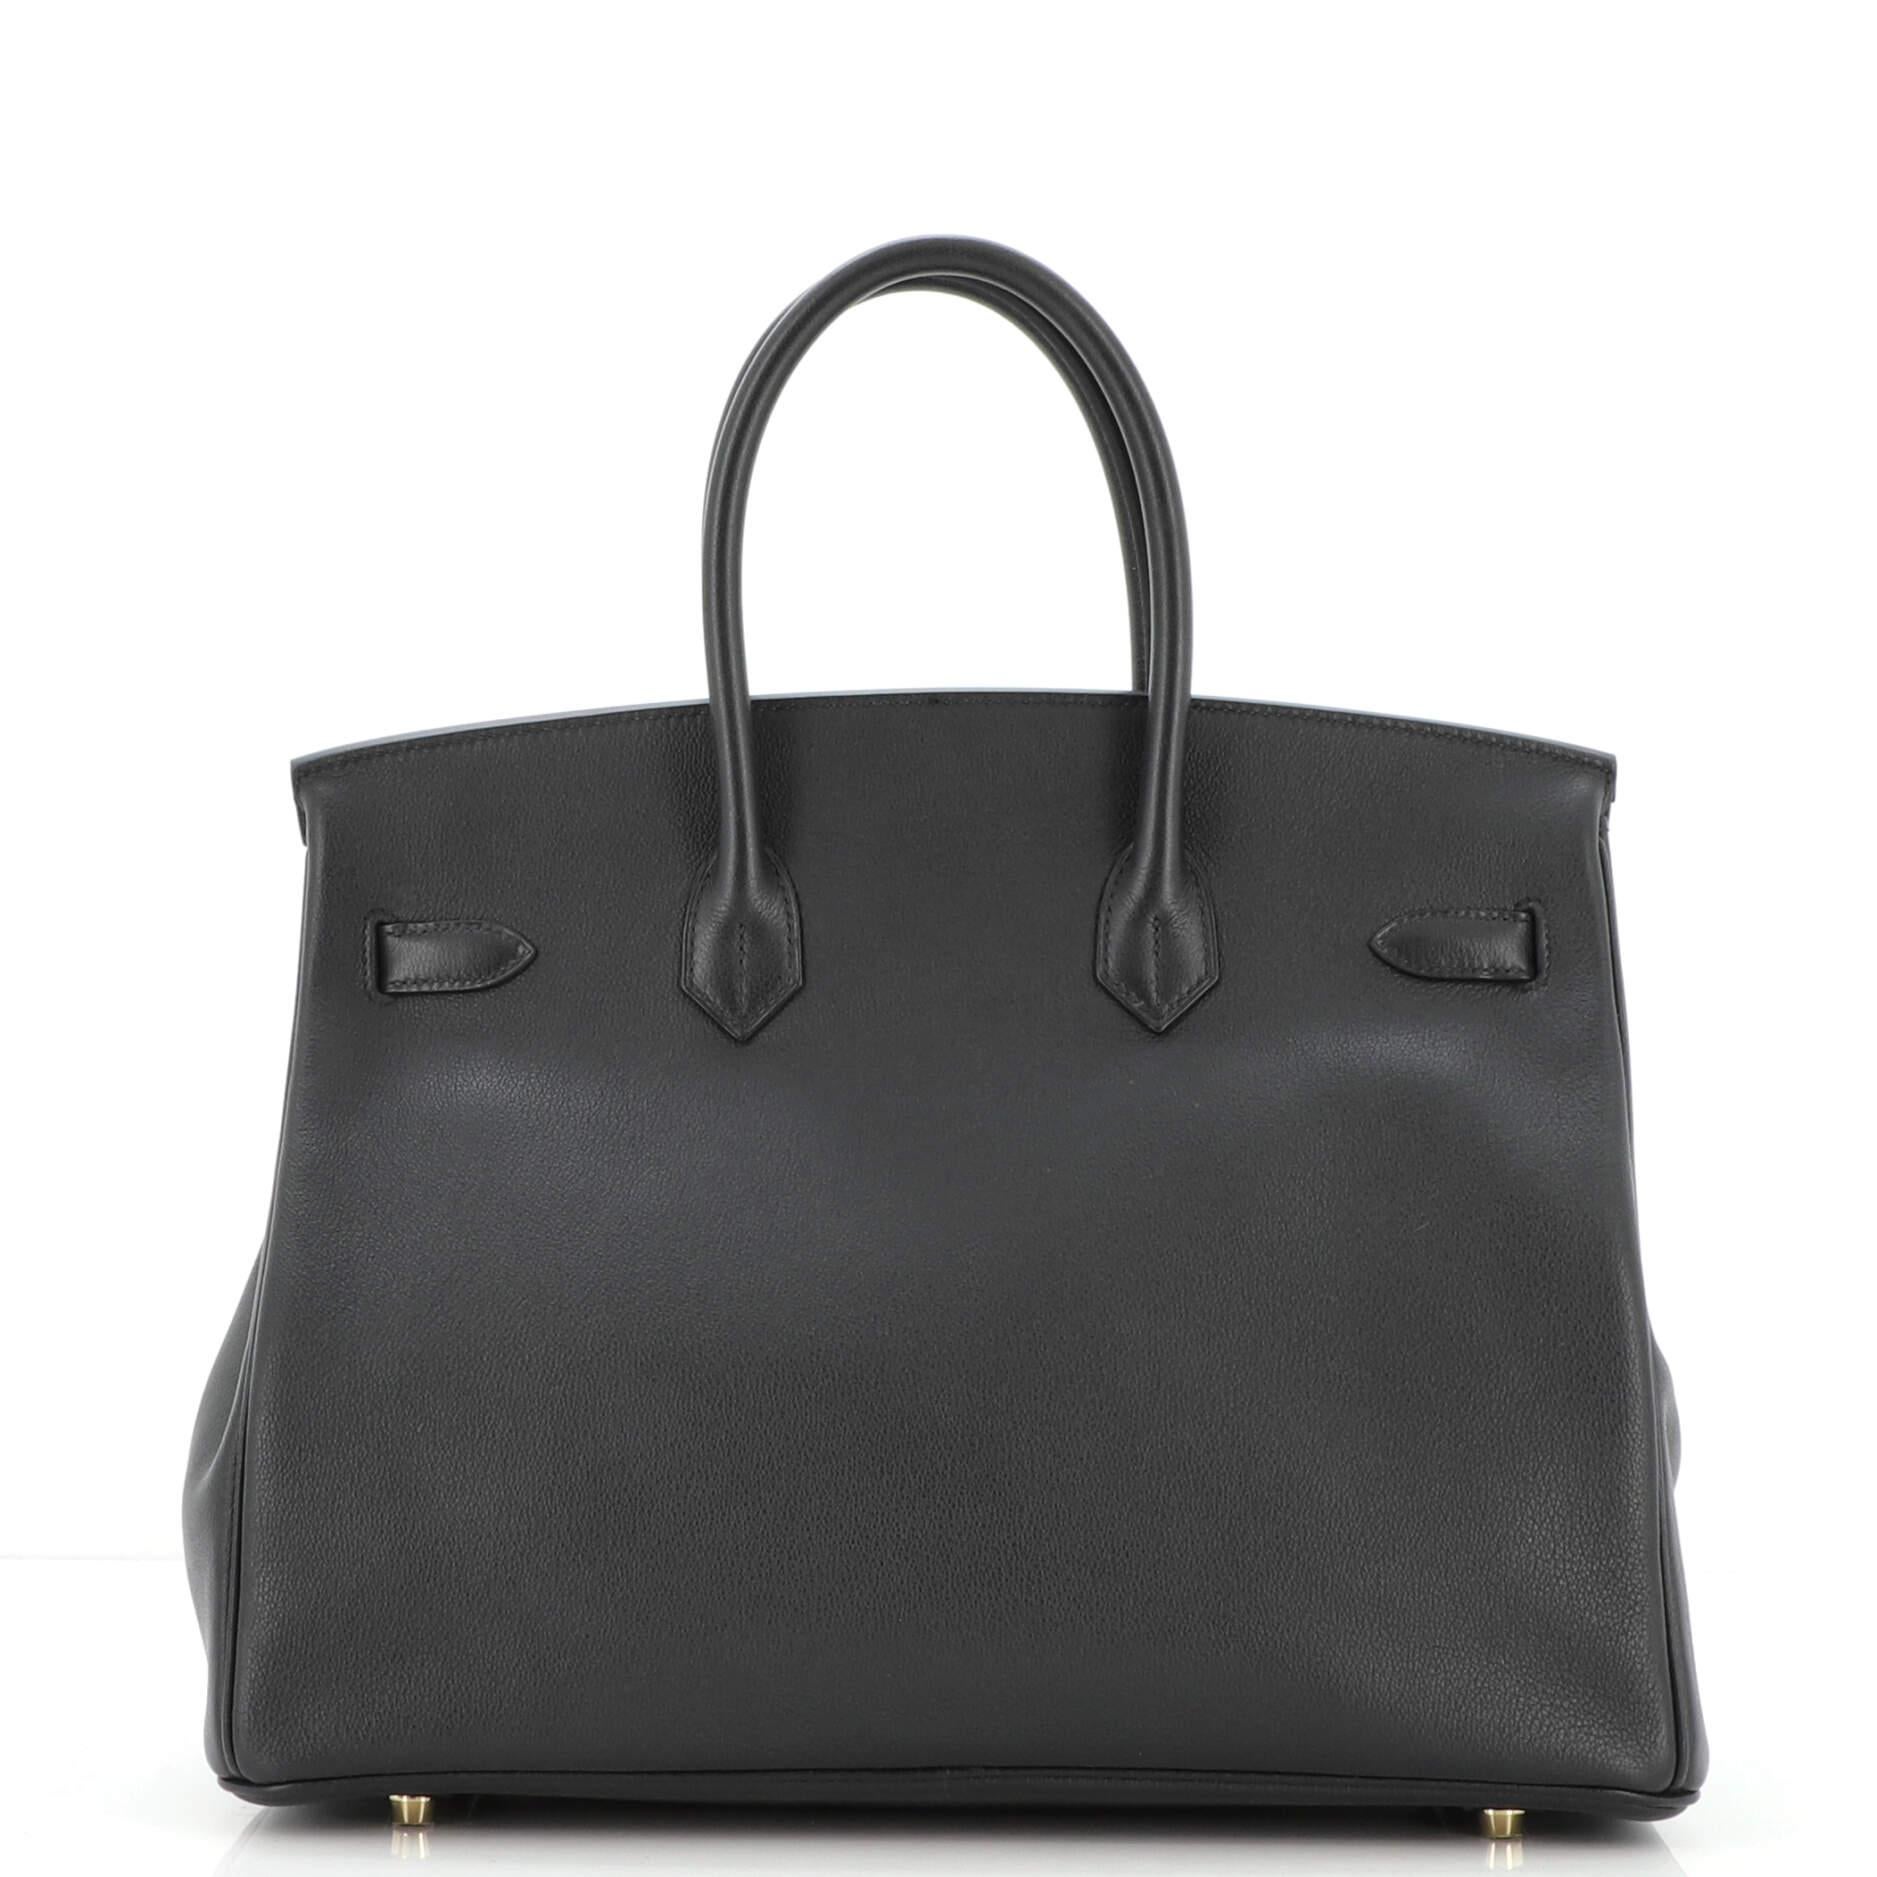 Hermes Birkin Handbag Noir Evergrain with Gold Hardware 35 In Good Condition For Sale In NY, NY